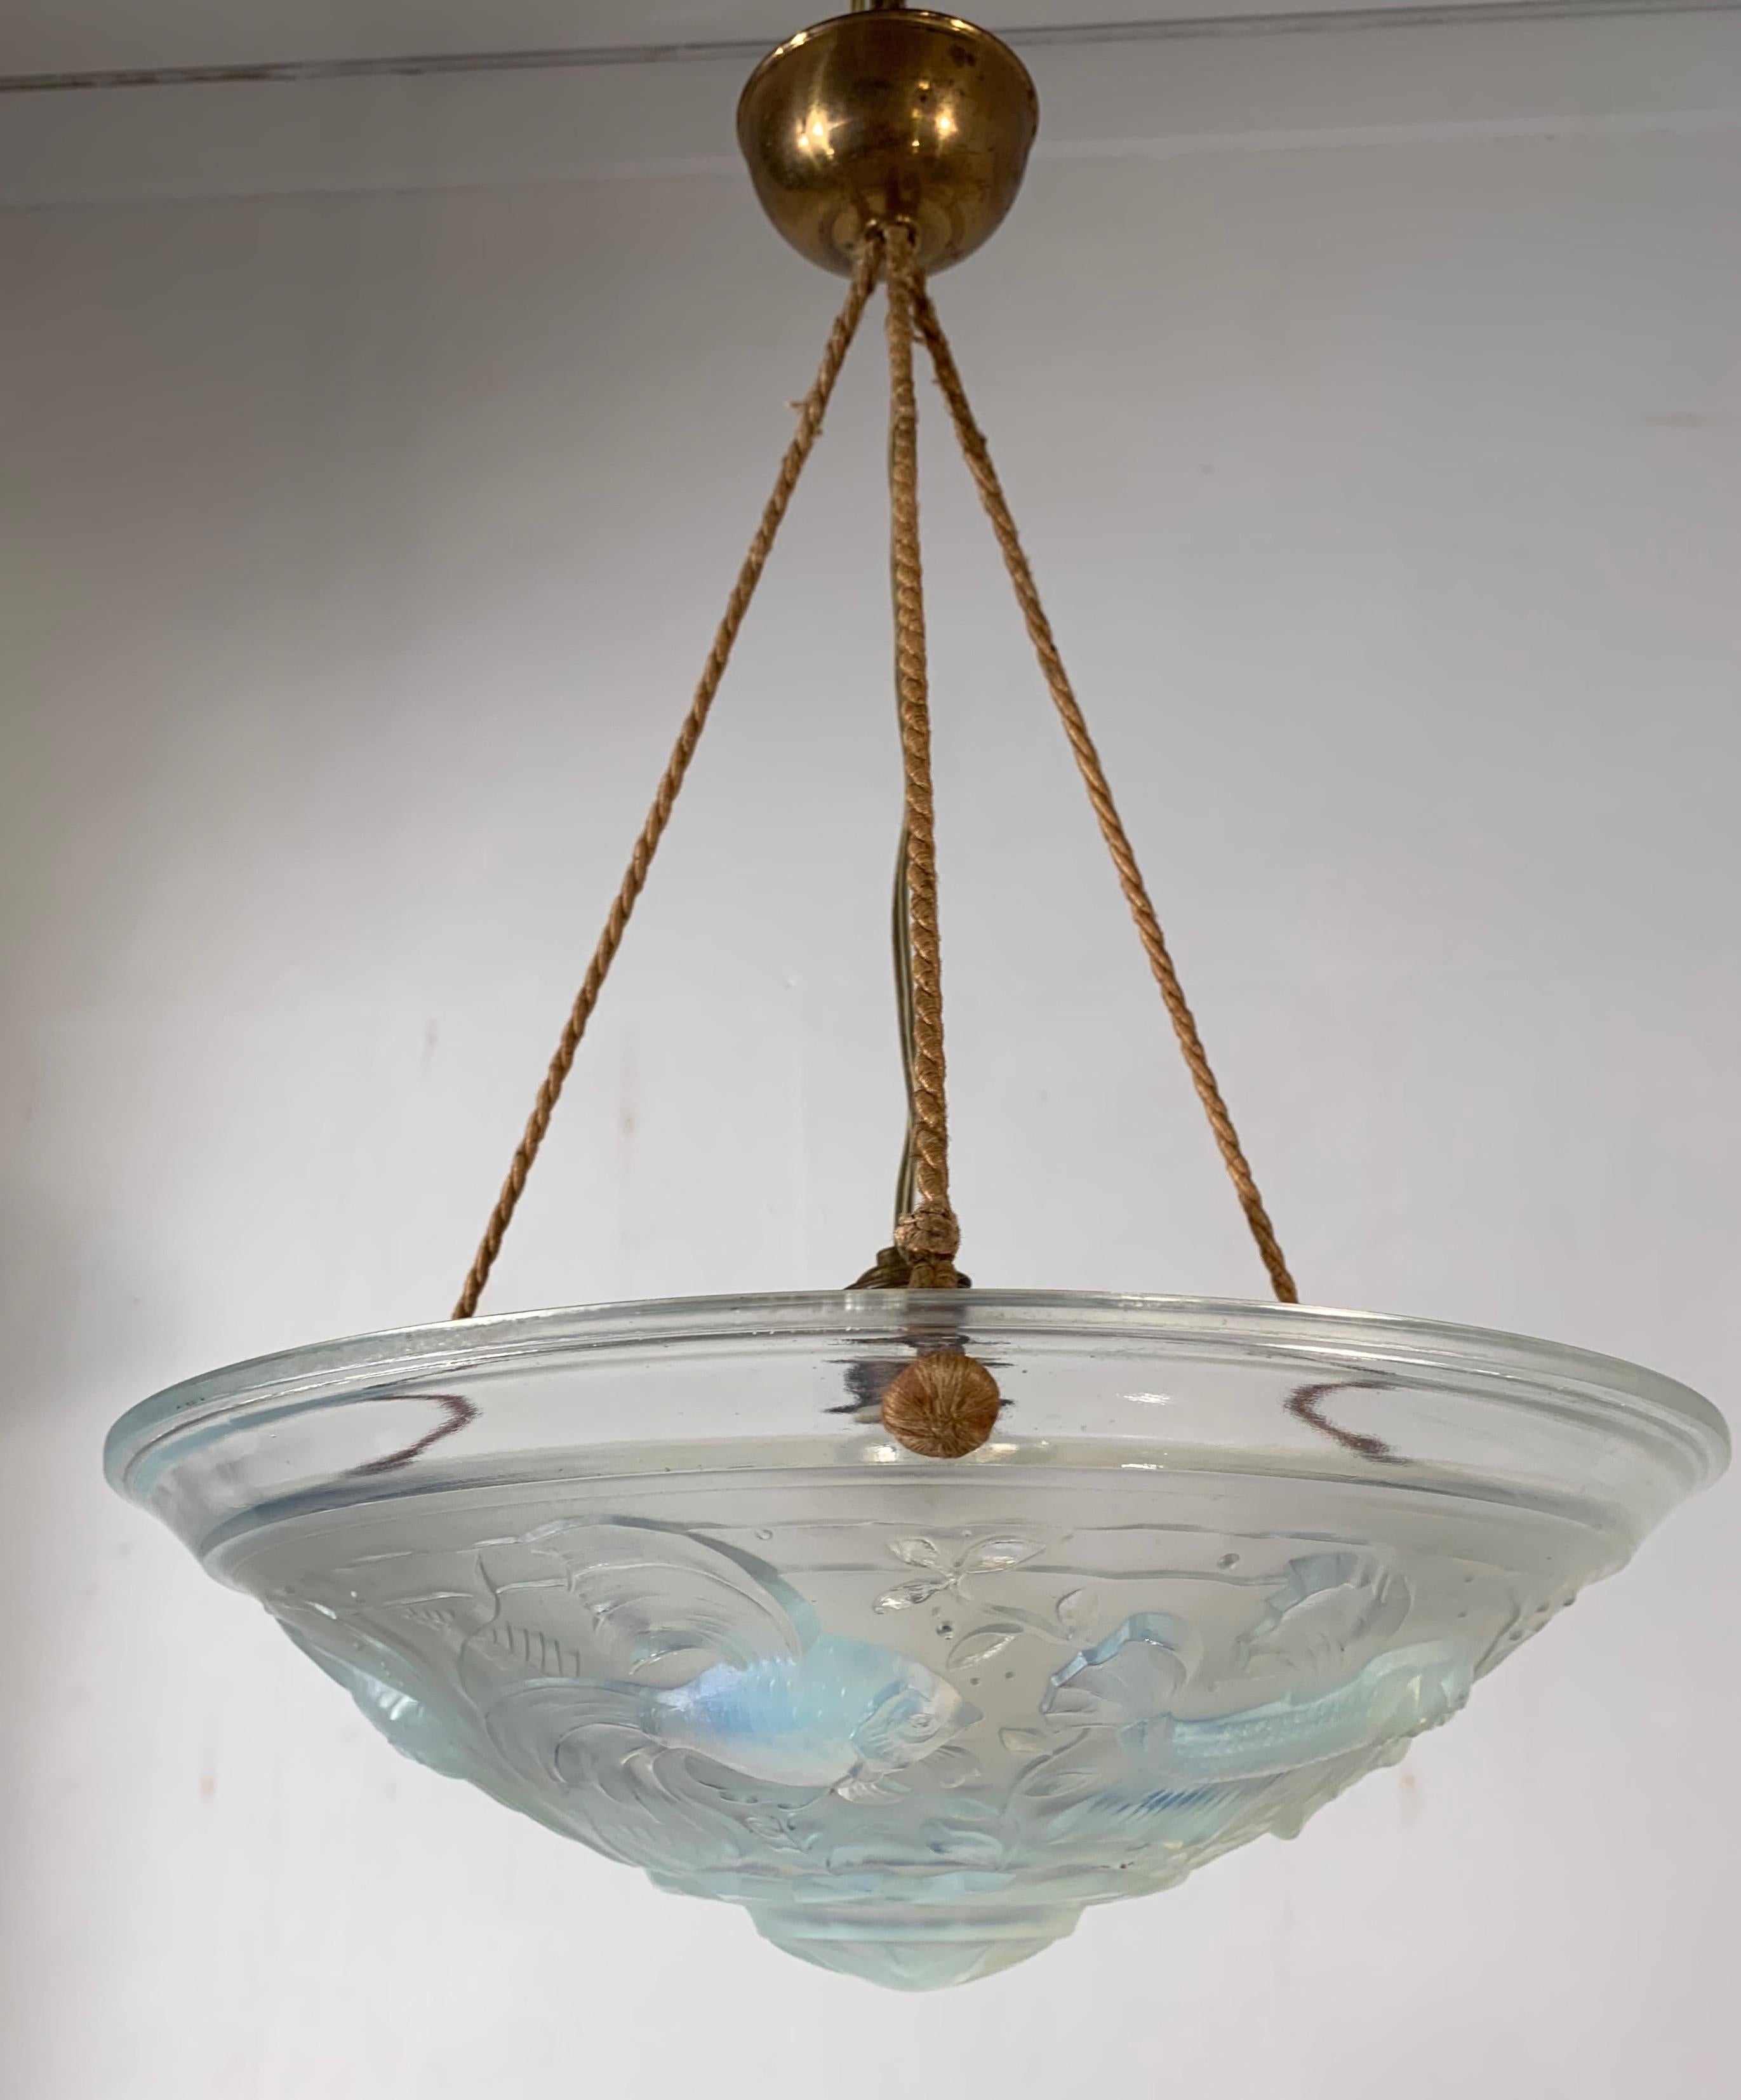 fish with a hanging light